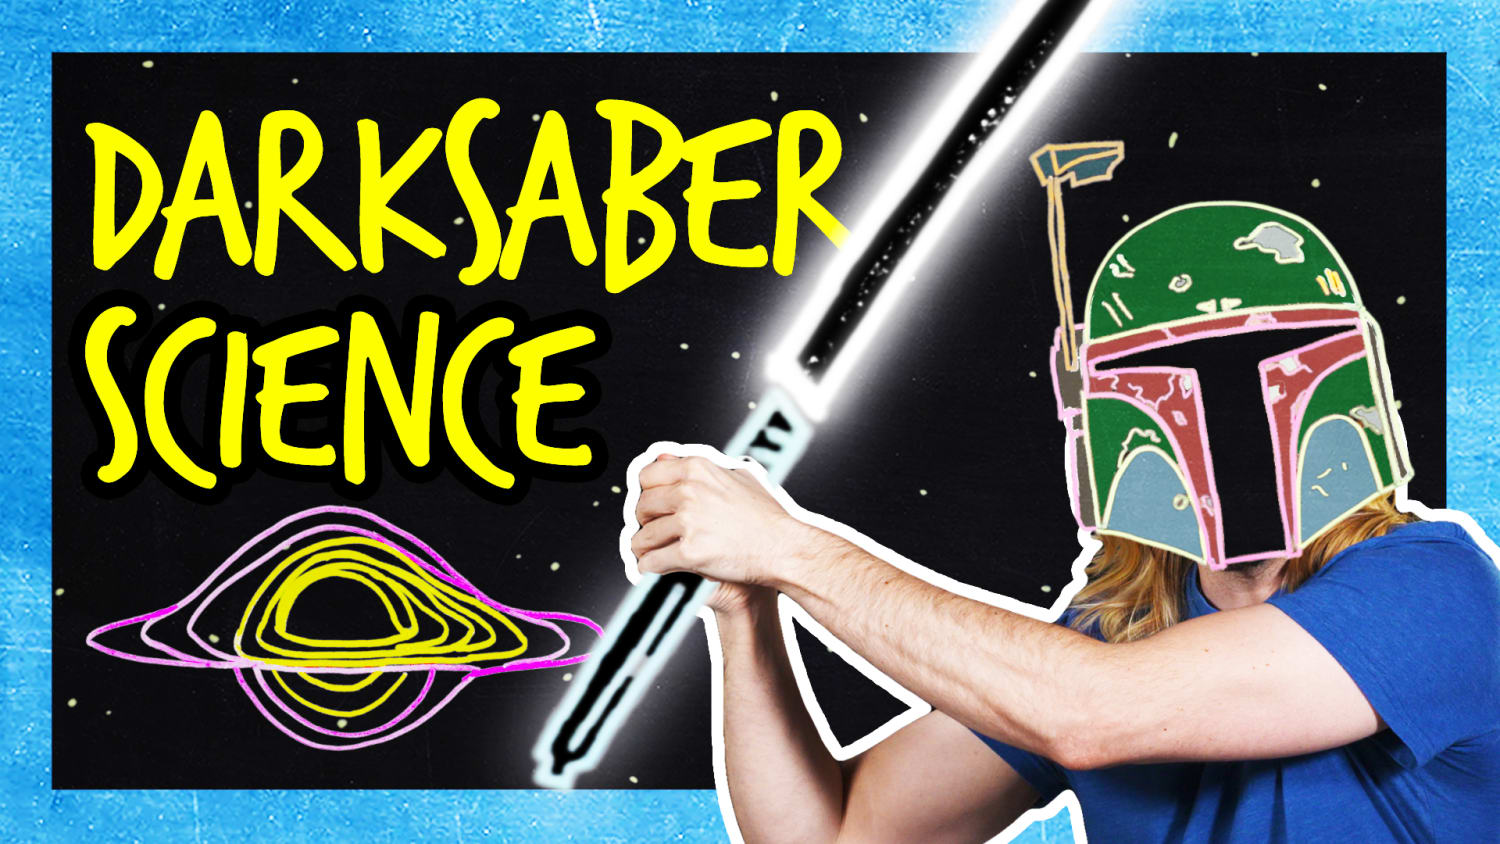 The DARKSABER Explained (Star Wars SCIENCE)